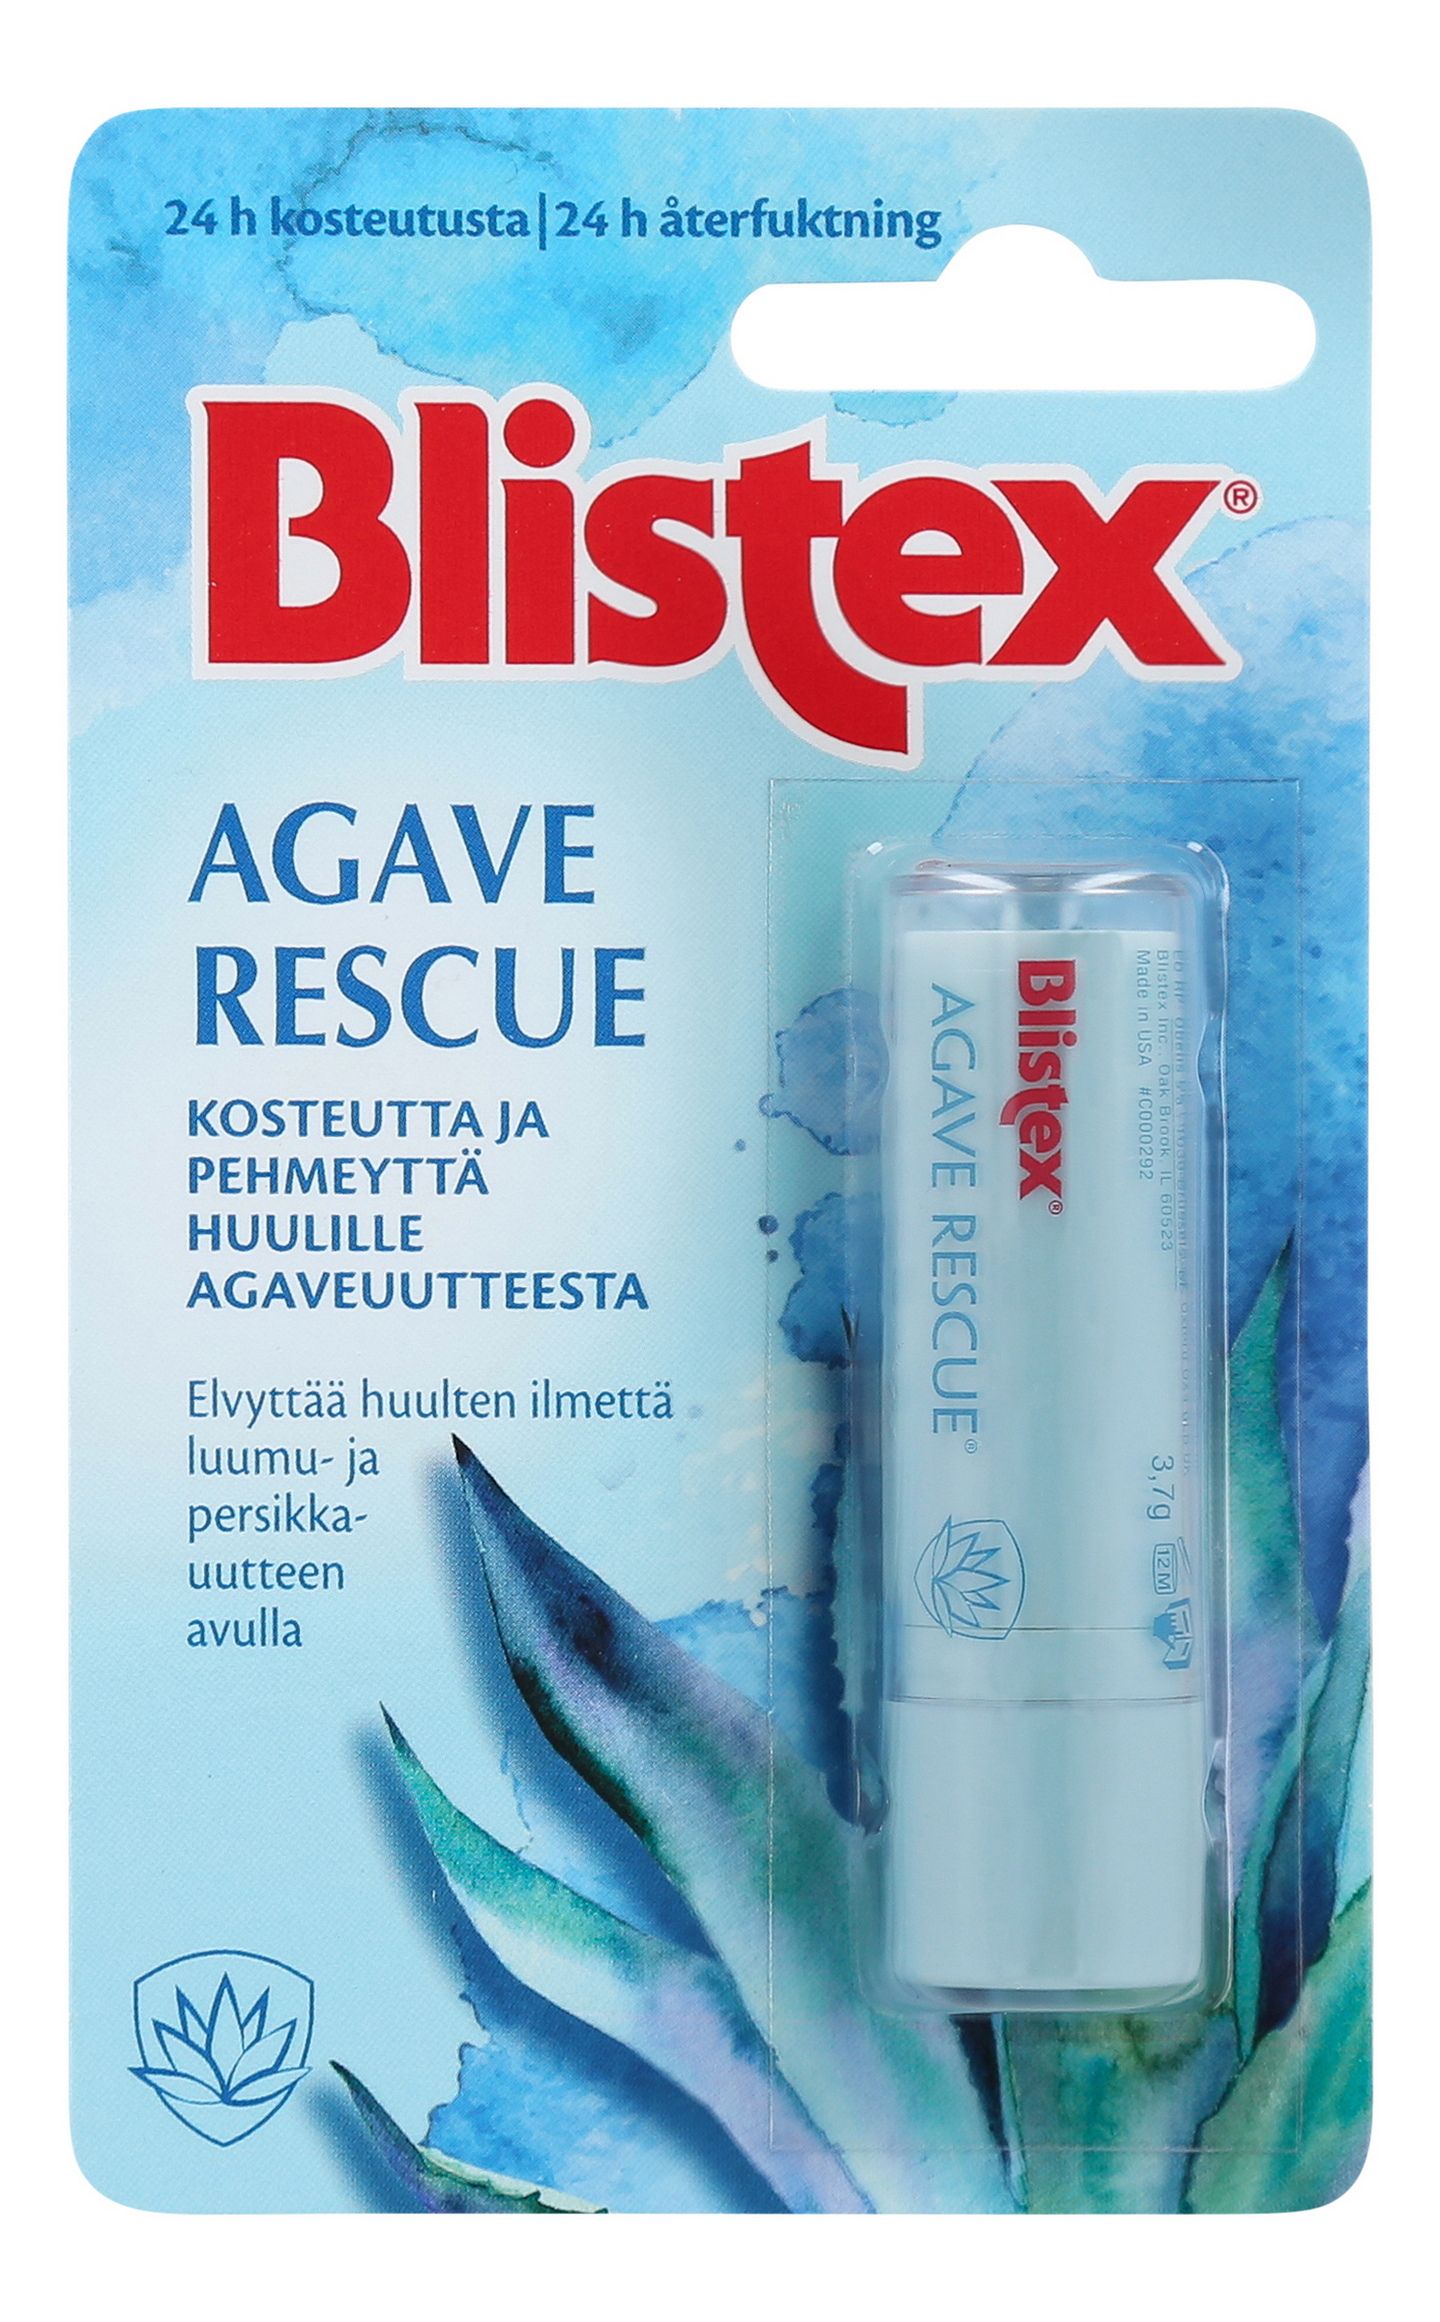 Blistex Agave Rescue huulivoide 3,7g